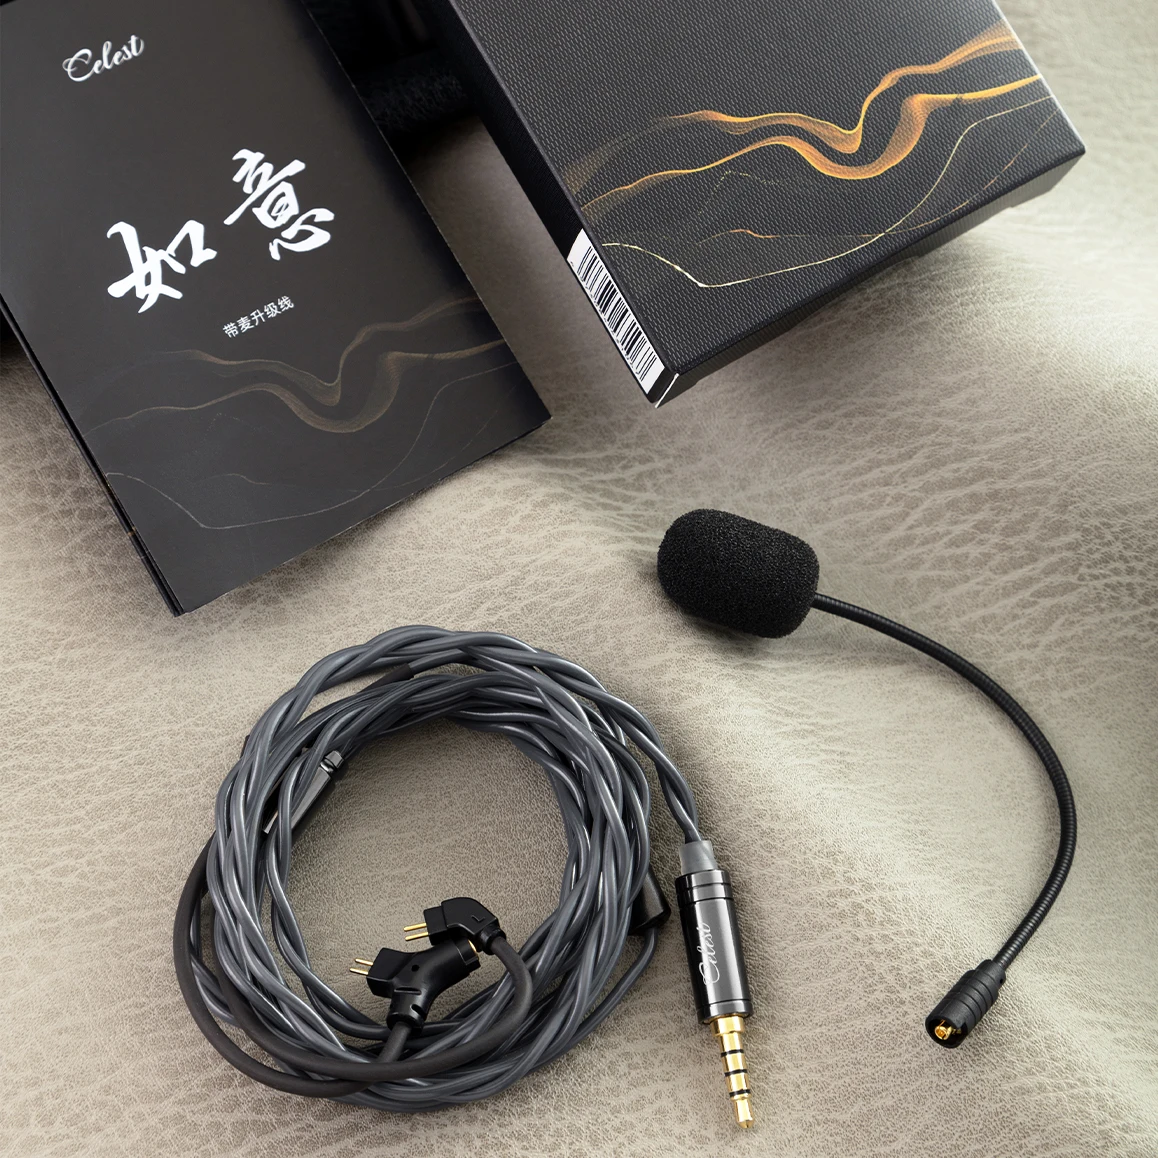 

Kinera Celest RUYI HIFI Microphone Earphone Cable with Detachable 0.78 2pin MMCX Cable Esport Music Gaming Livestreaming Headset